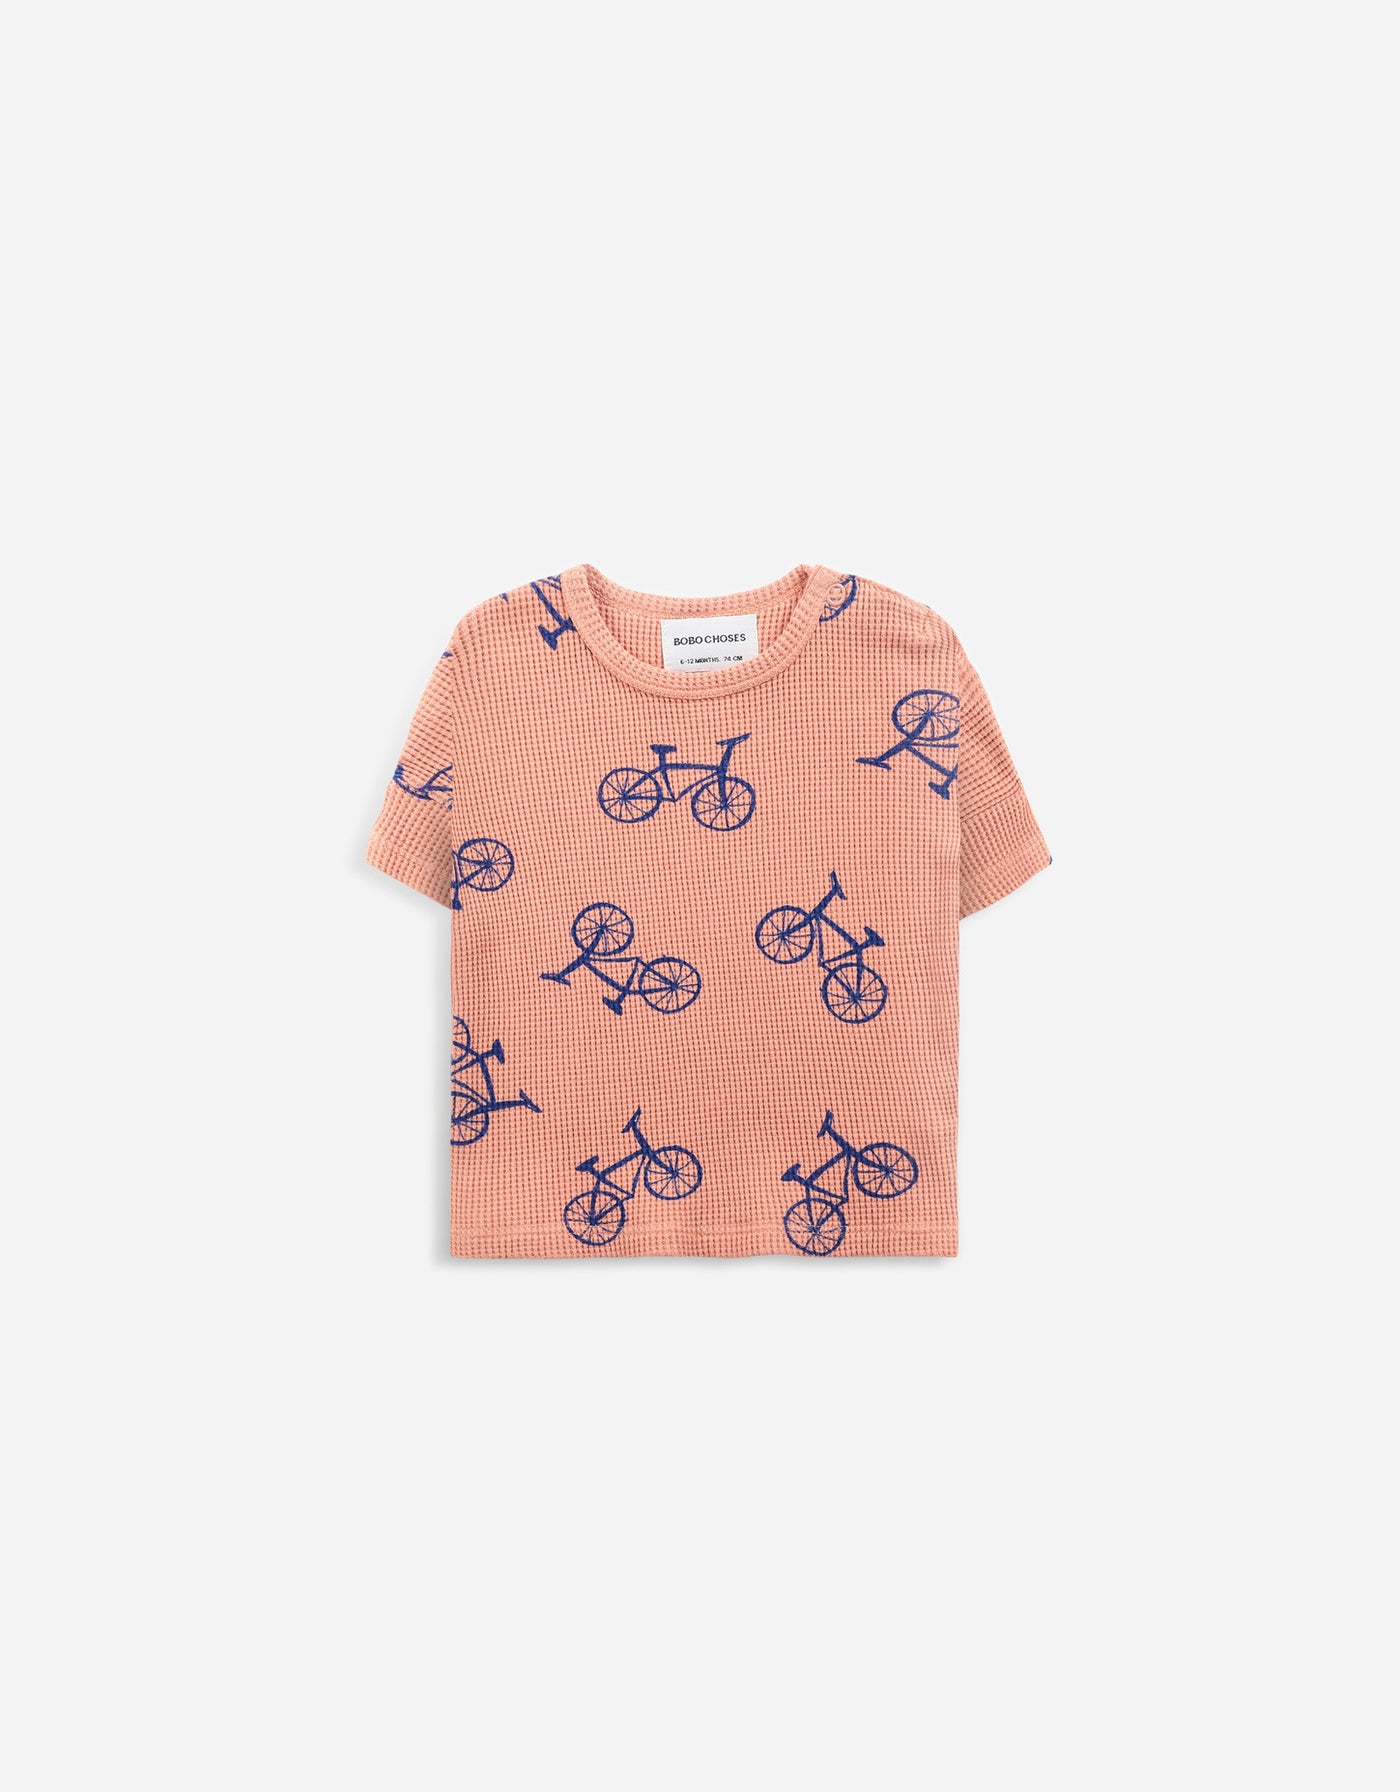 short sleeved t-shirt with bicycle design